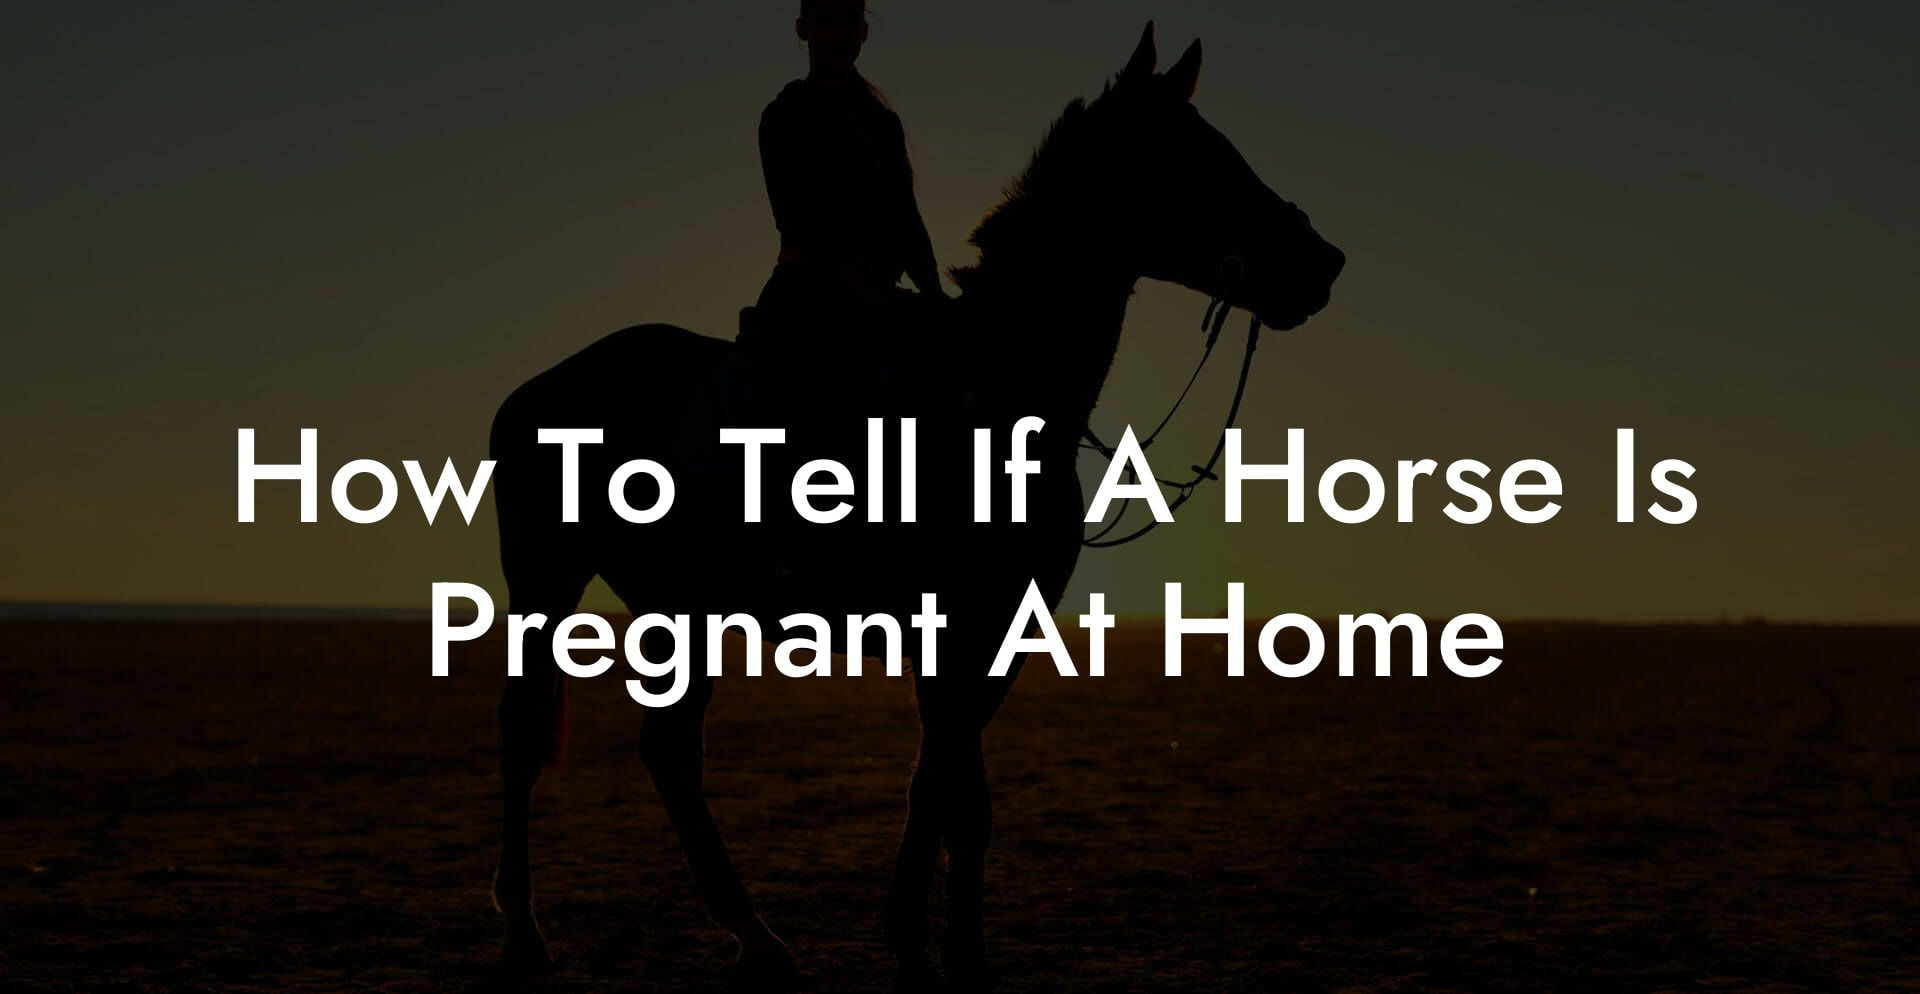 How To Tell If A Horse Is Pregnant At Home